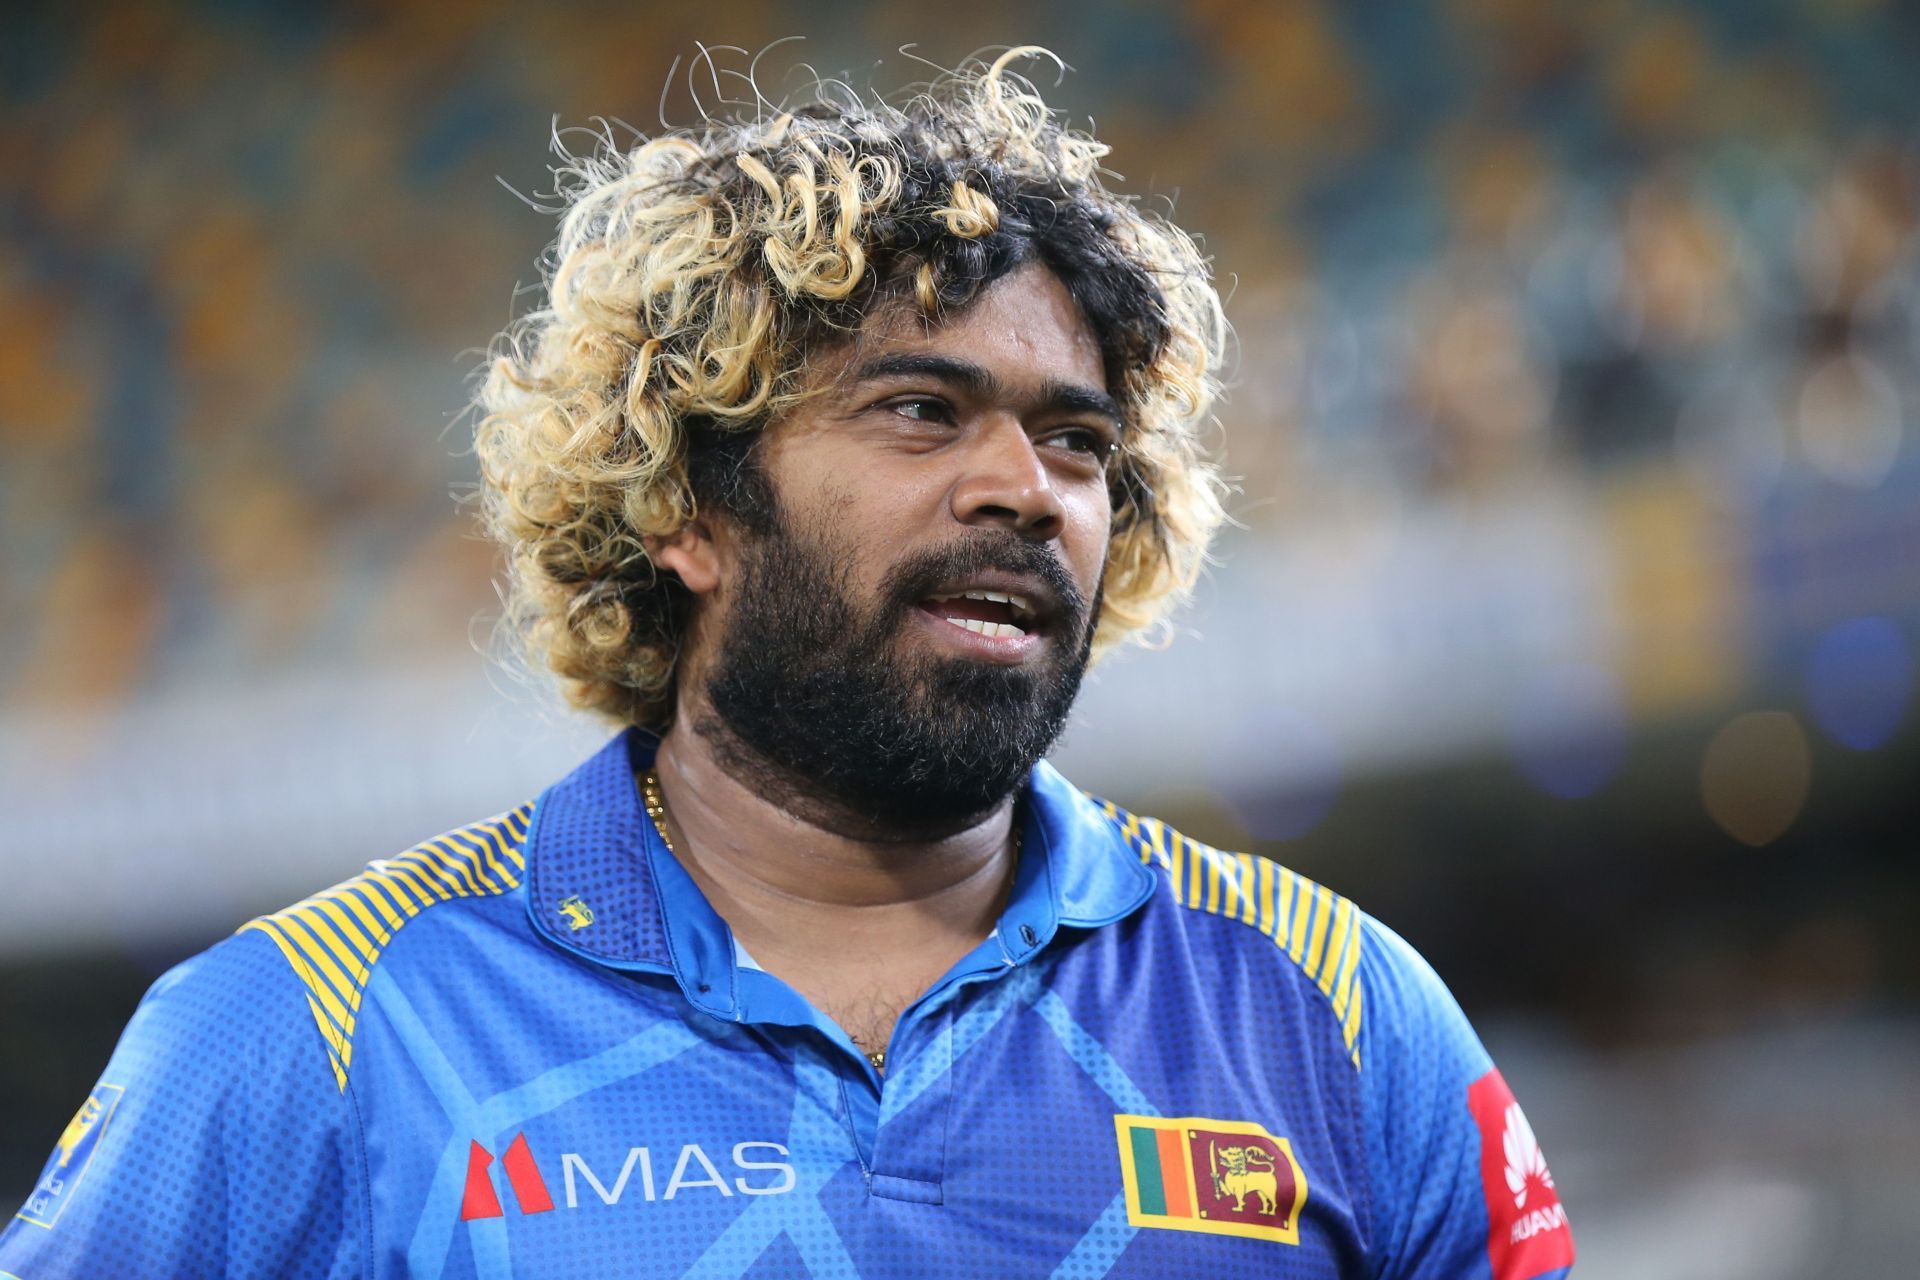 Lasith Malinga has been appointed as the fast bowling coach of Rajasthan Royals for IPL 2022